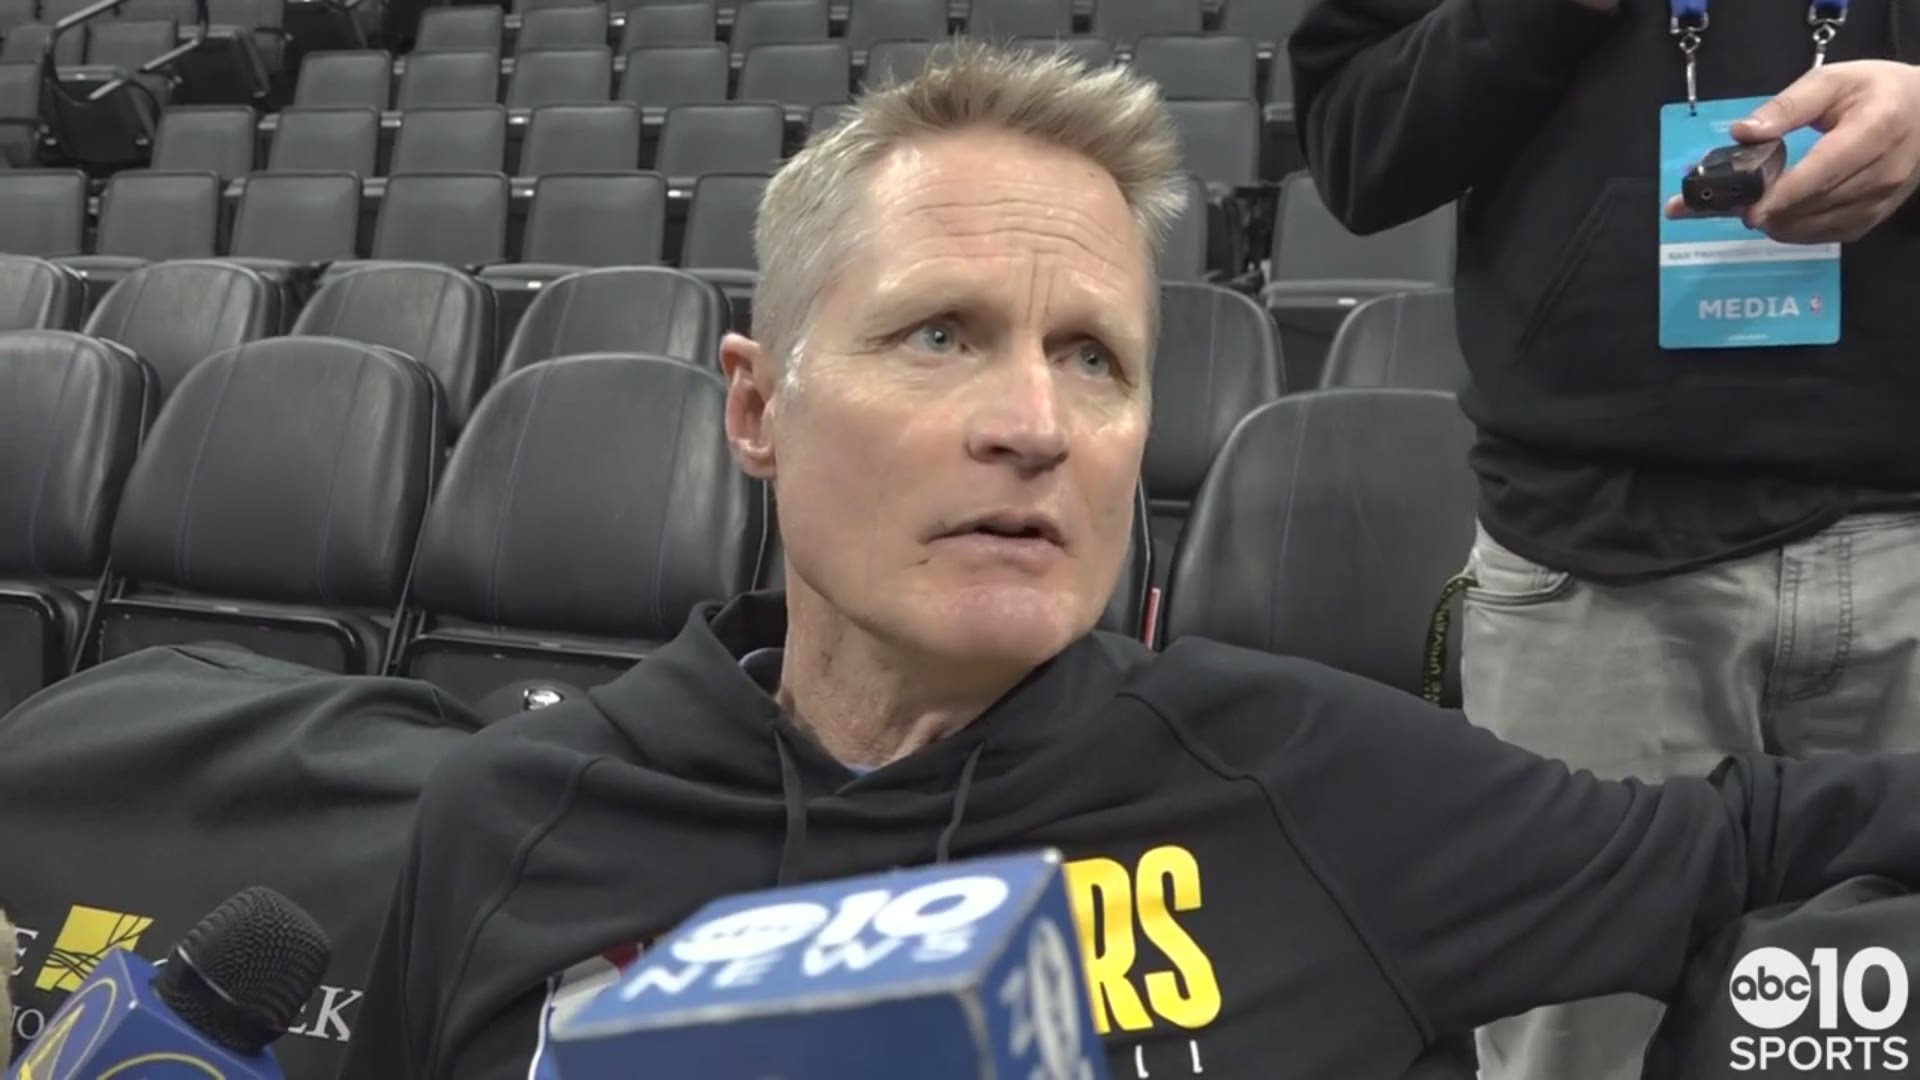 Warriors coach Steve Kerr discusses Golden State's matchup with the Kings and Willie Cauley-Stein returning to Sacramento for the first time as opposition.